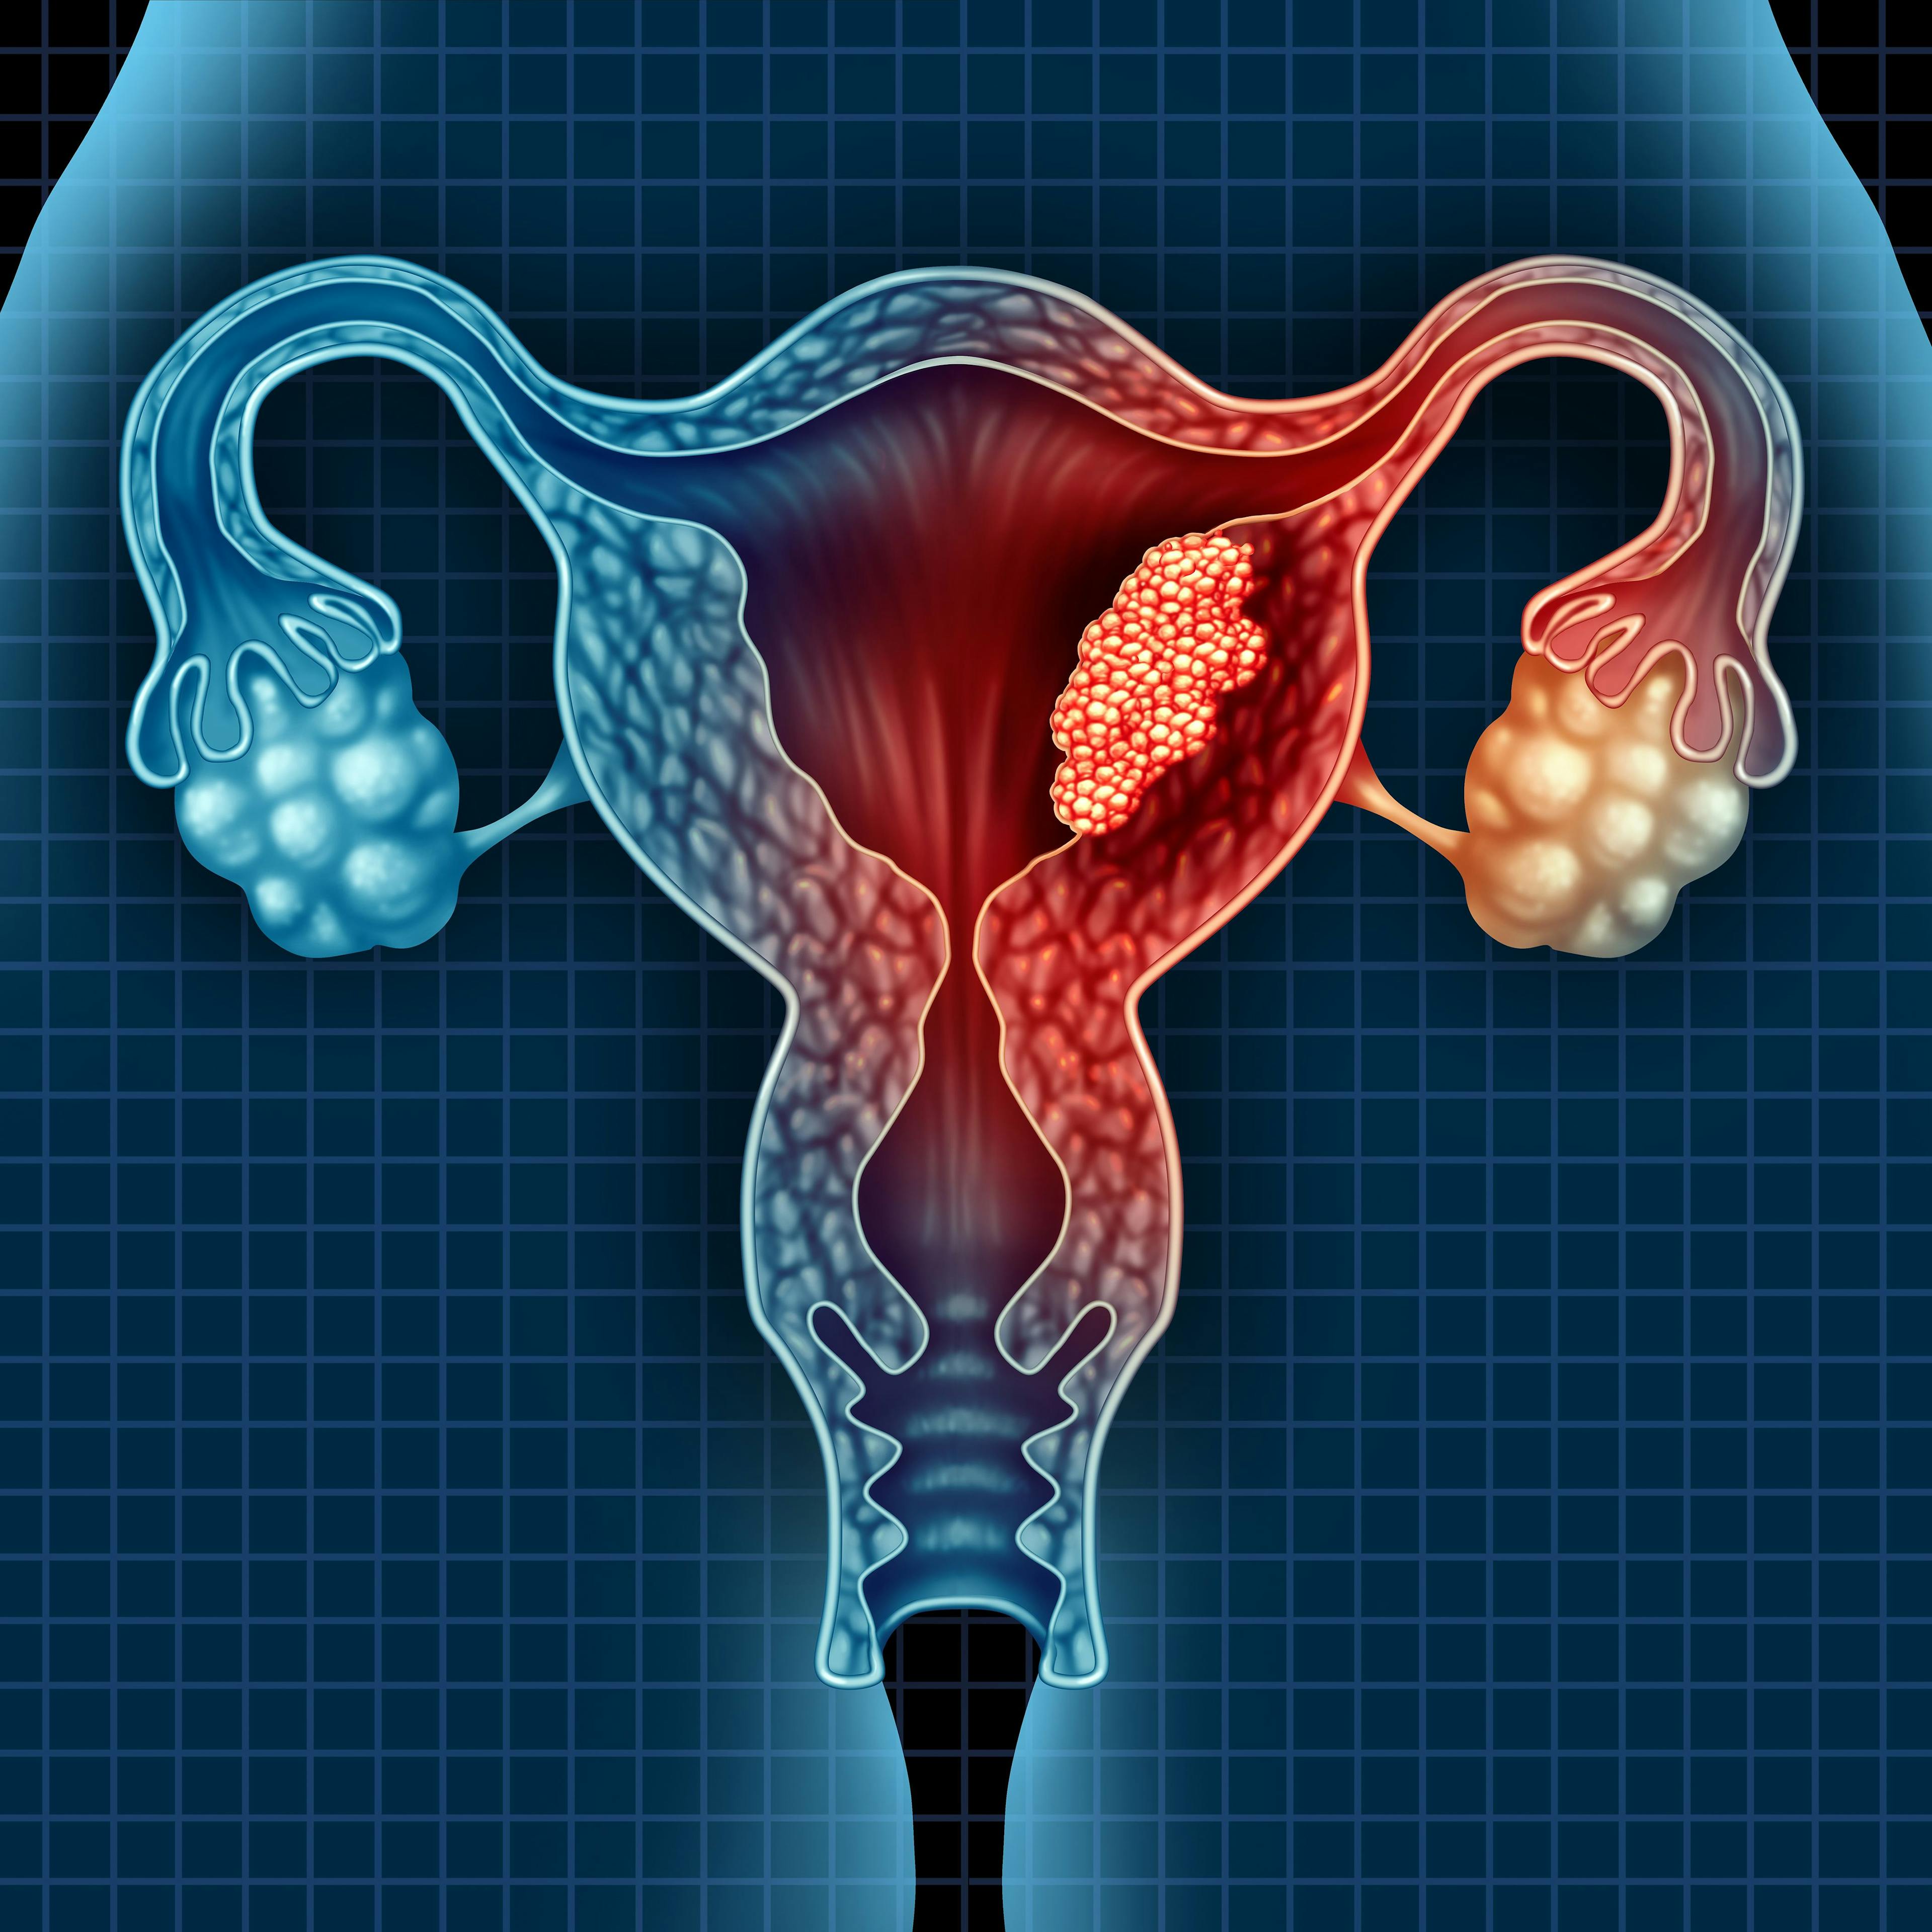 PI3K Inhibitors May Help Prevent Tamoxifen-Associated Uterine Cancer in Patients With Breast Cancer